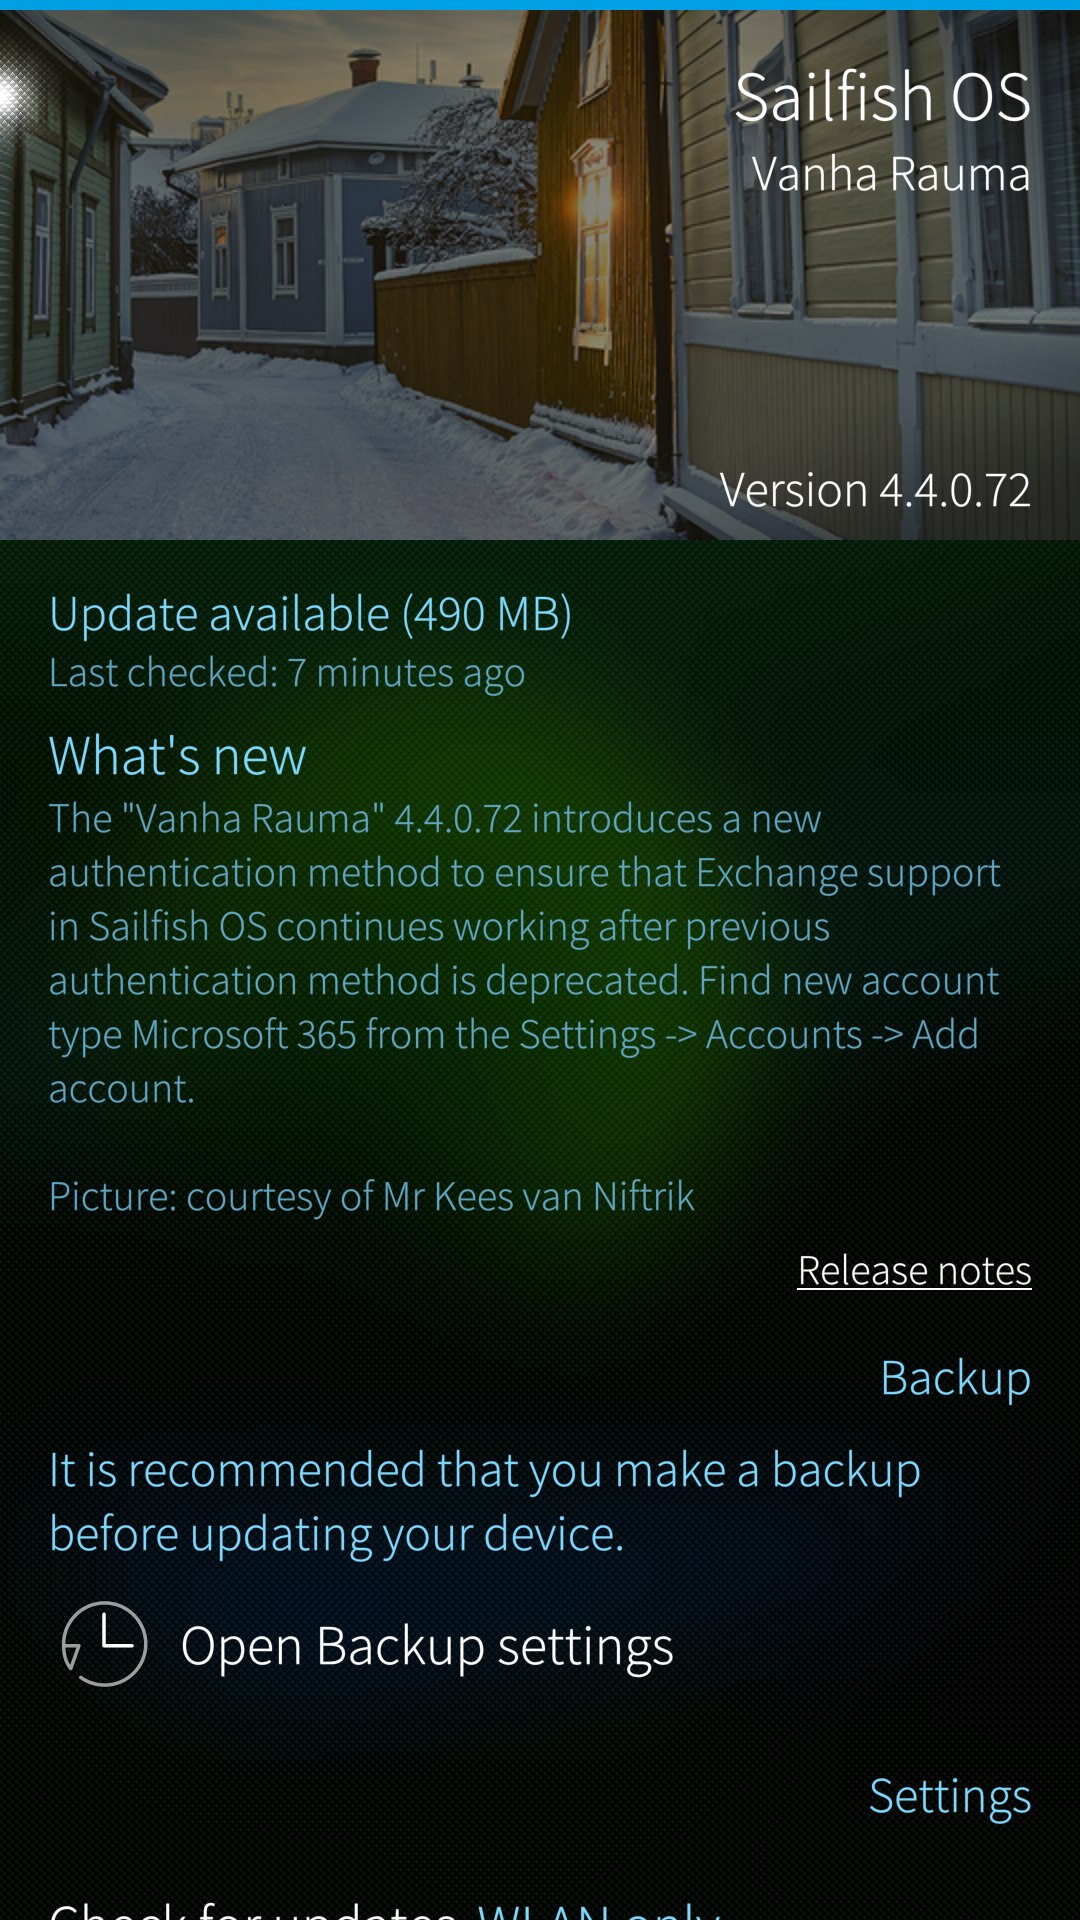 OS update available